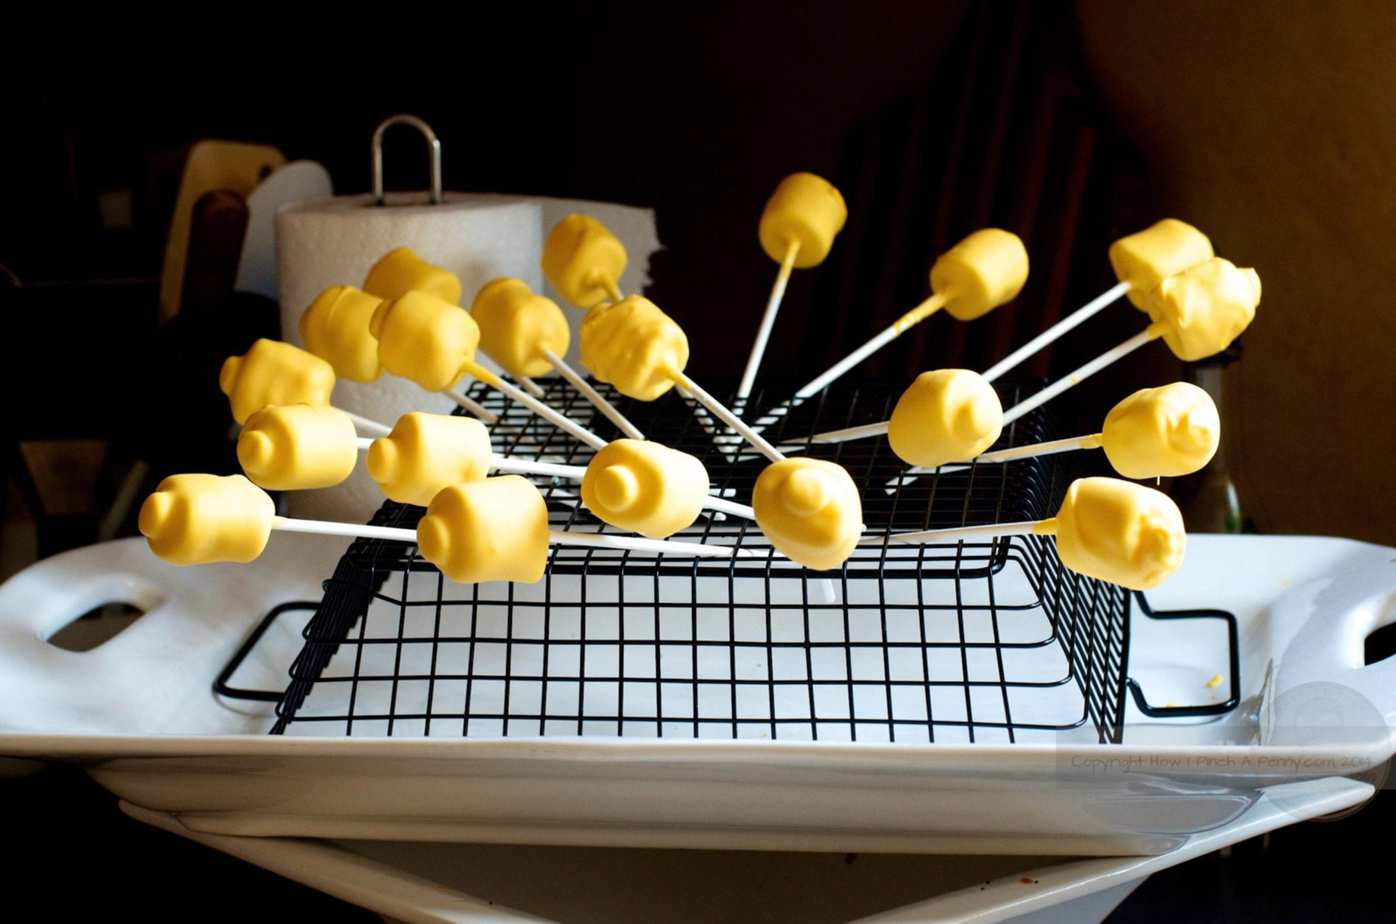 Lego Head Marshmallow Pops drying on a rack